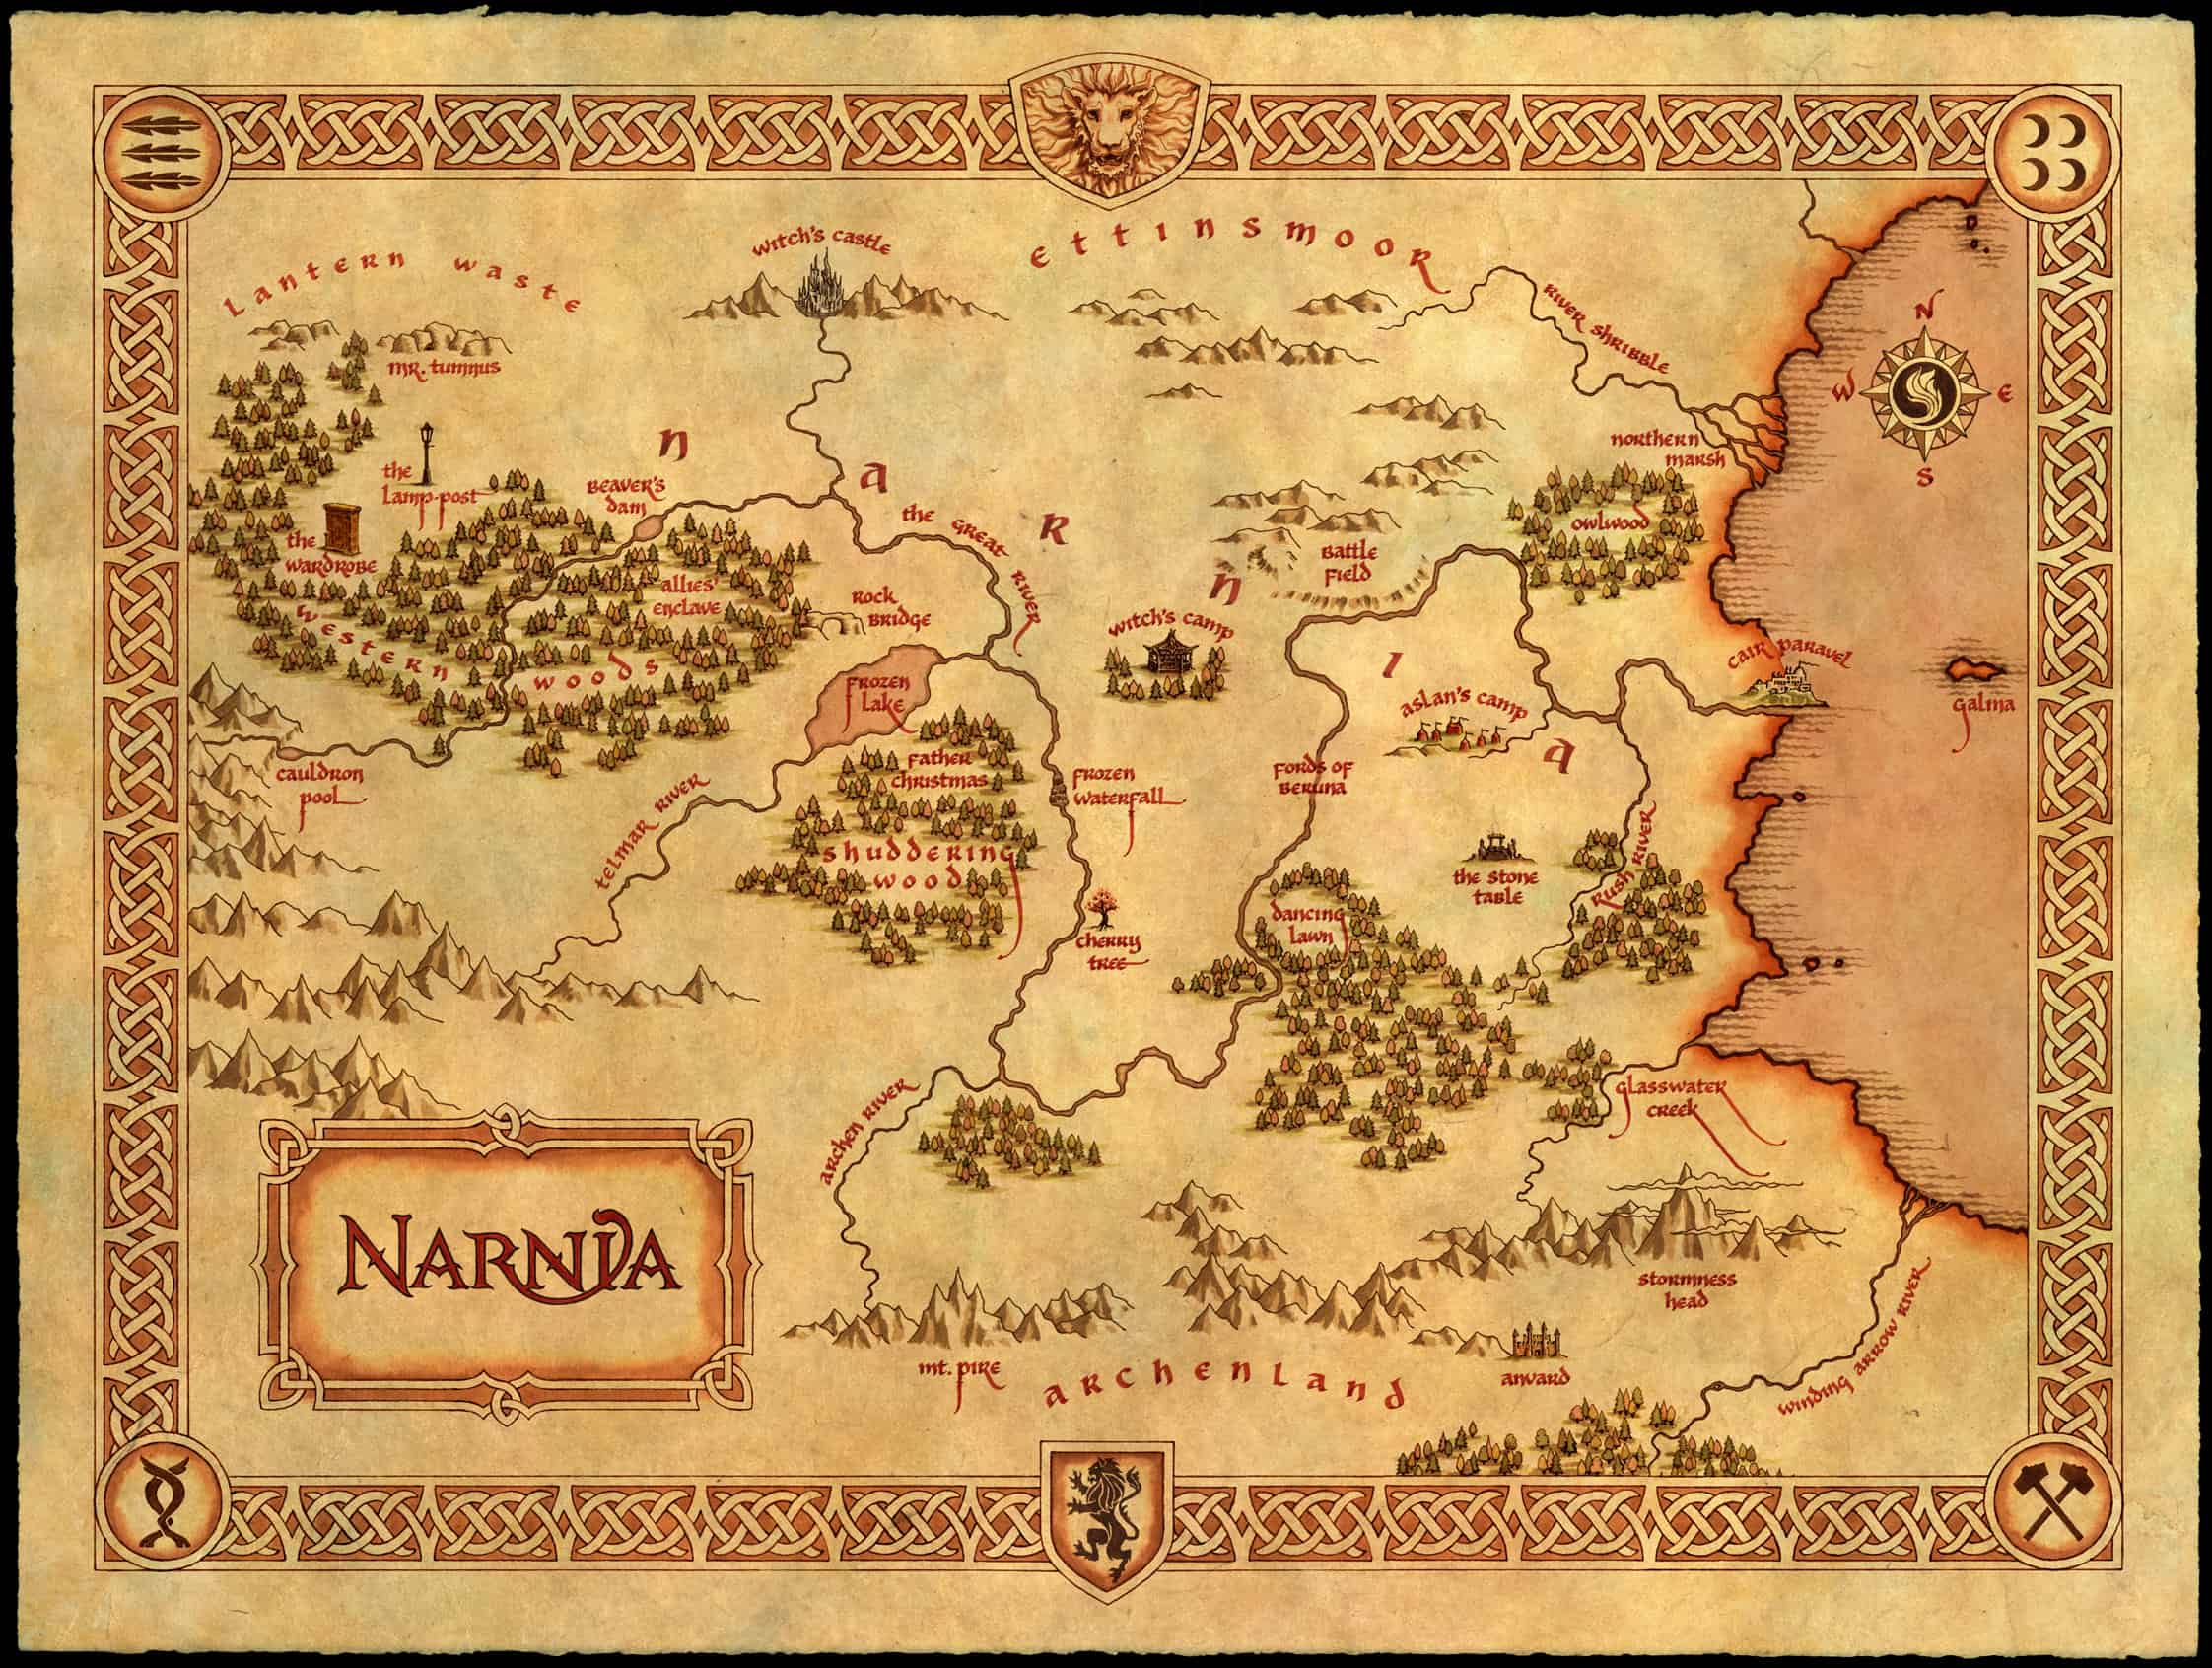 Free image/jpeg, Resolution: 2244x1692, File size: 1Mb, Narnia Map as graphic illustration